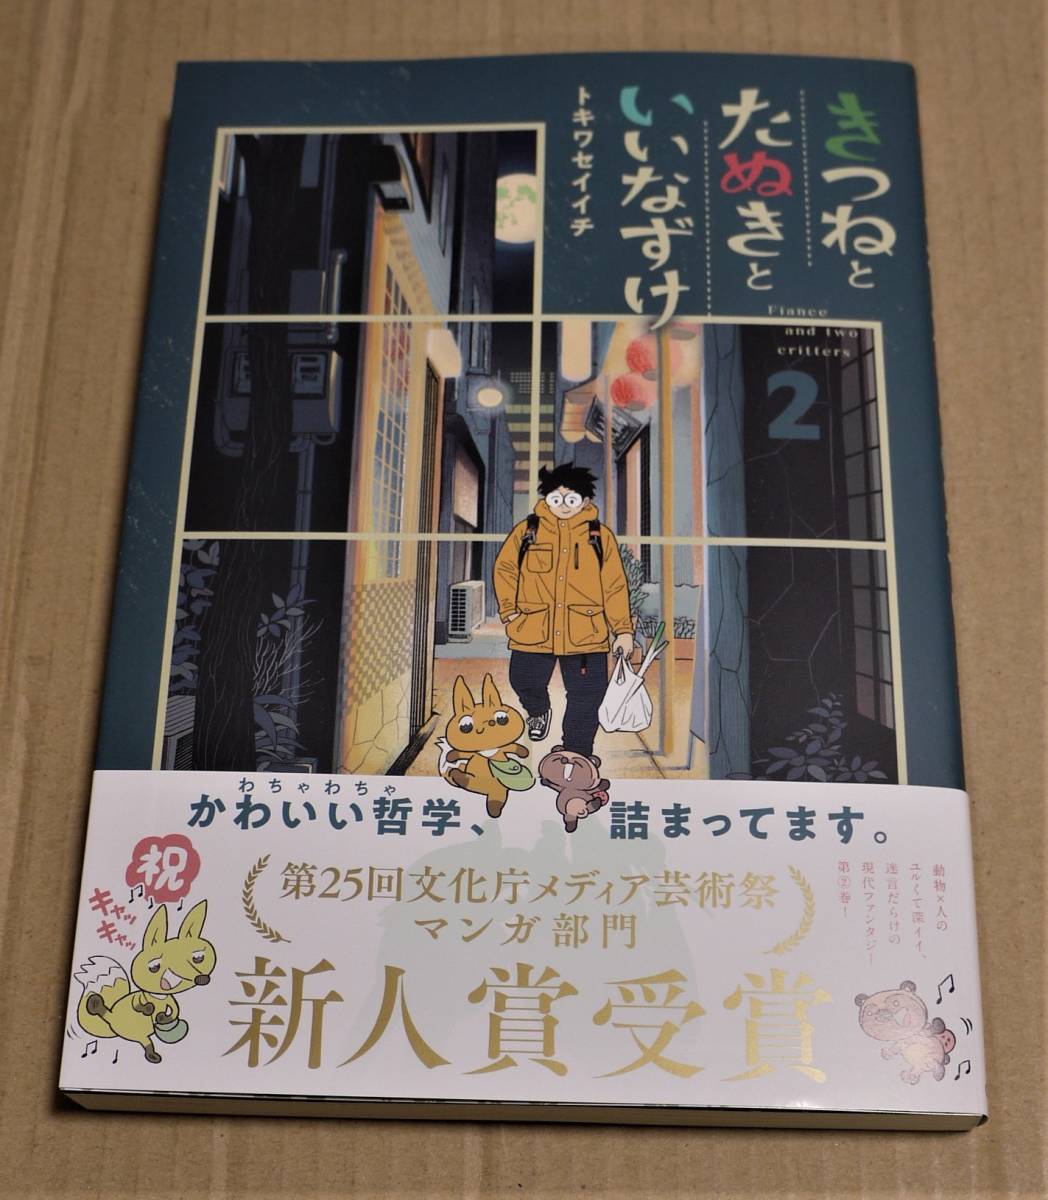 The Fox and the Tanuki and the Engagement Volume 2 (by Tokiwa Seiichi) with hand-drawn illustrations and signature. Click Post shipping included., Comics, Anime Goods, sign, Autograph